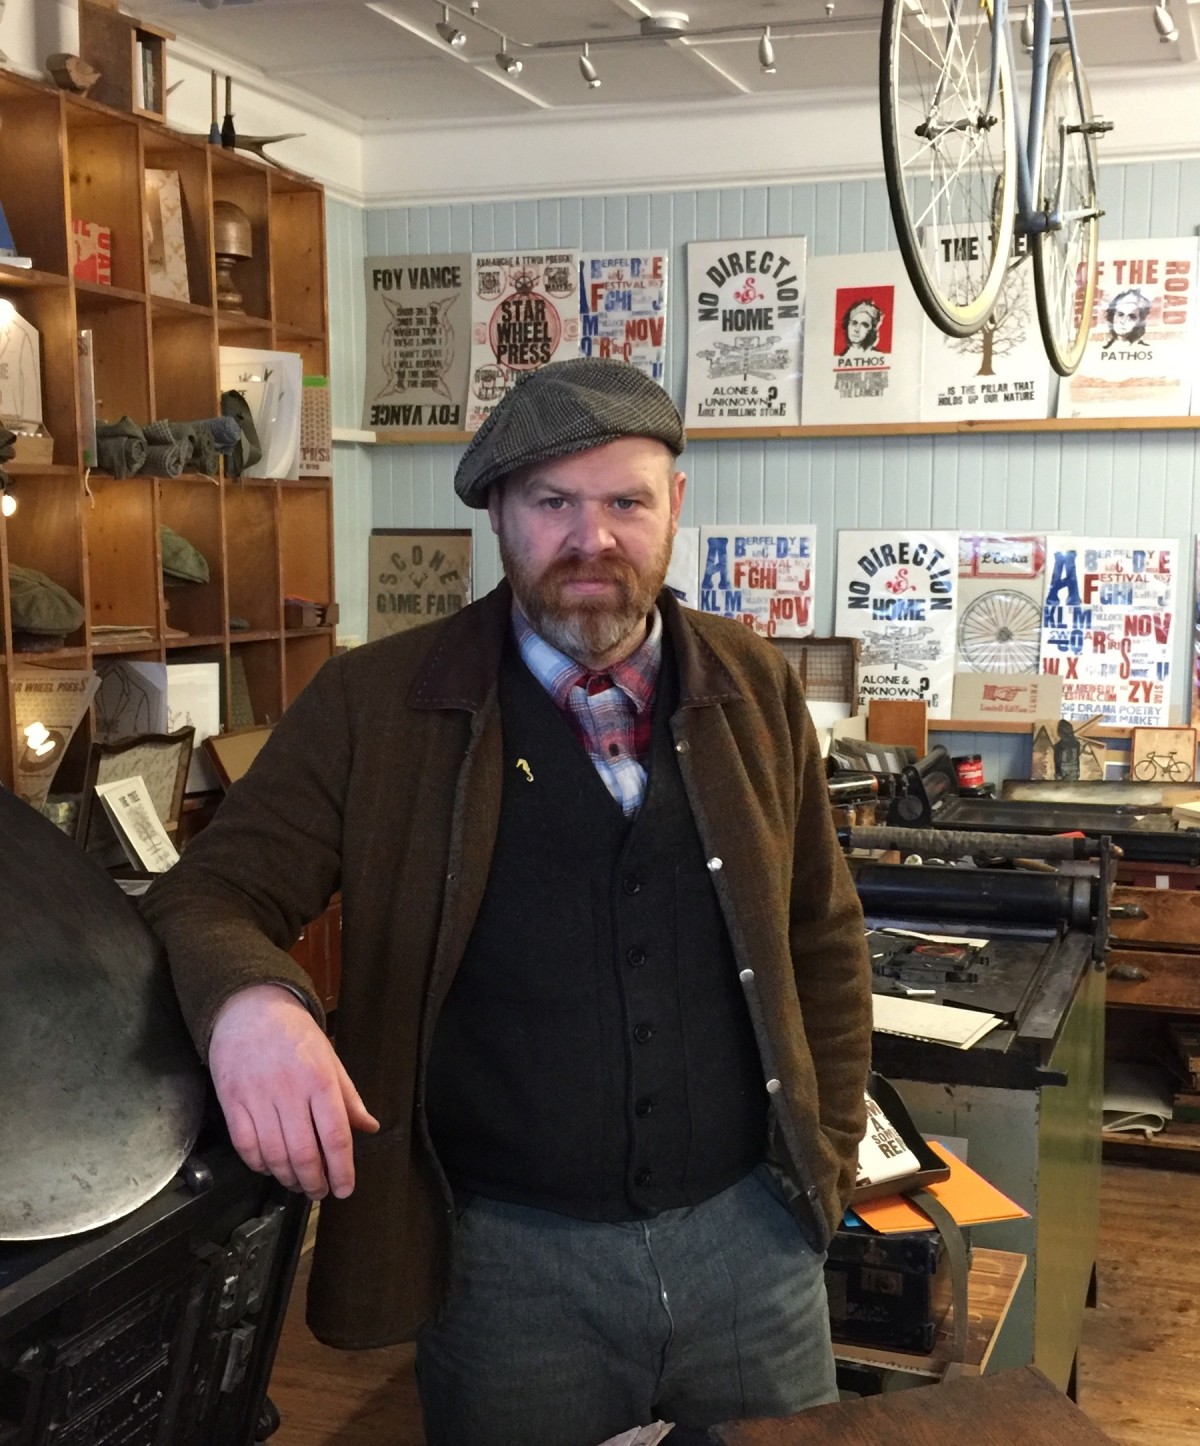 Ryan Hannigan is an Aberfeldy-based designer and painter and has been nominated as a Perth Pioneer for his work organising the annual Aberfeldy Festival and his work as lead designer at Haggart�s 1801 printmaking and tweed shop.